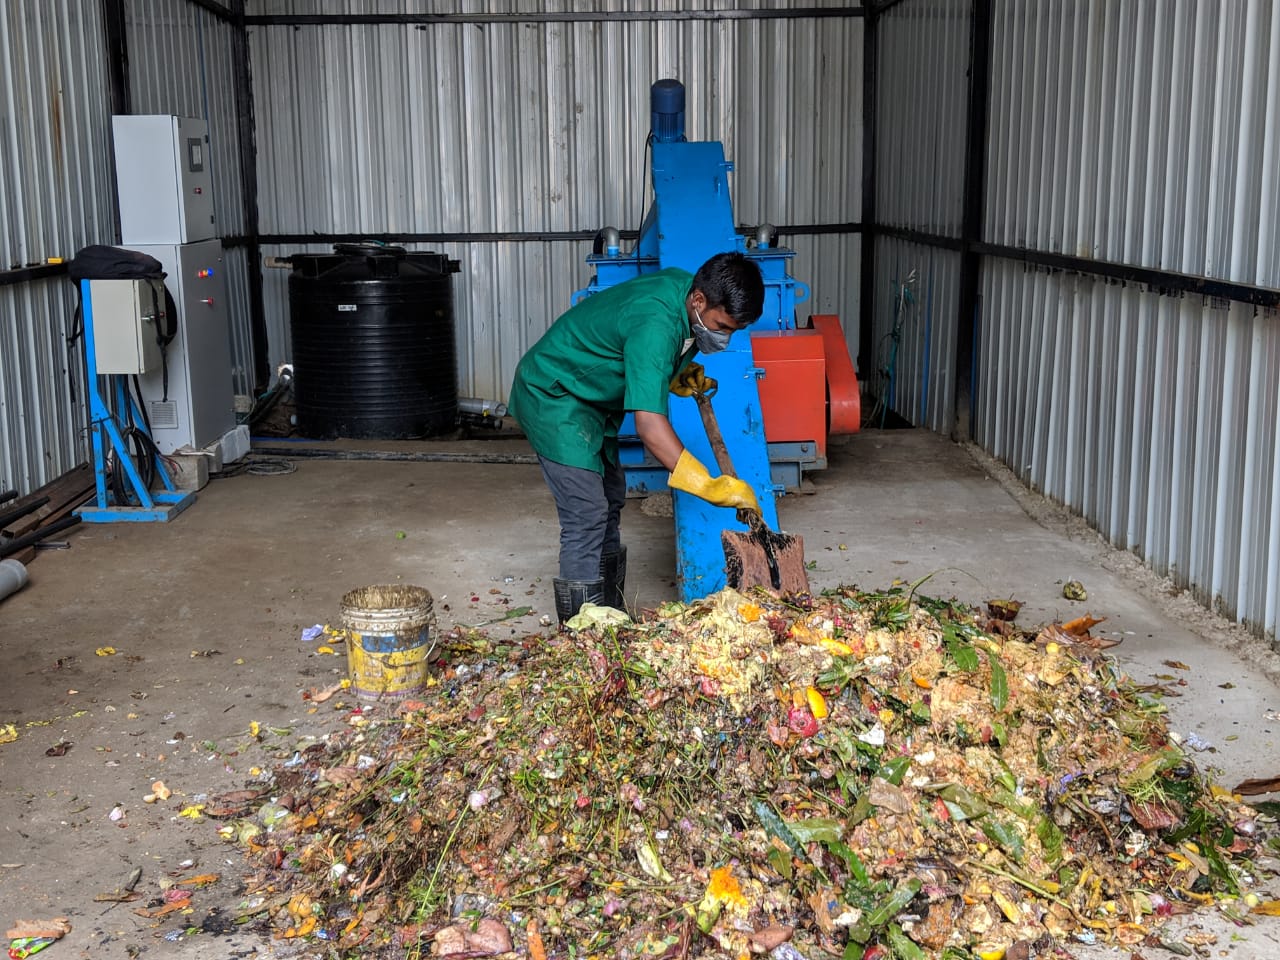 Residents of this Indian city convert kitchen waste into 100 kg of biogas